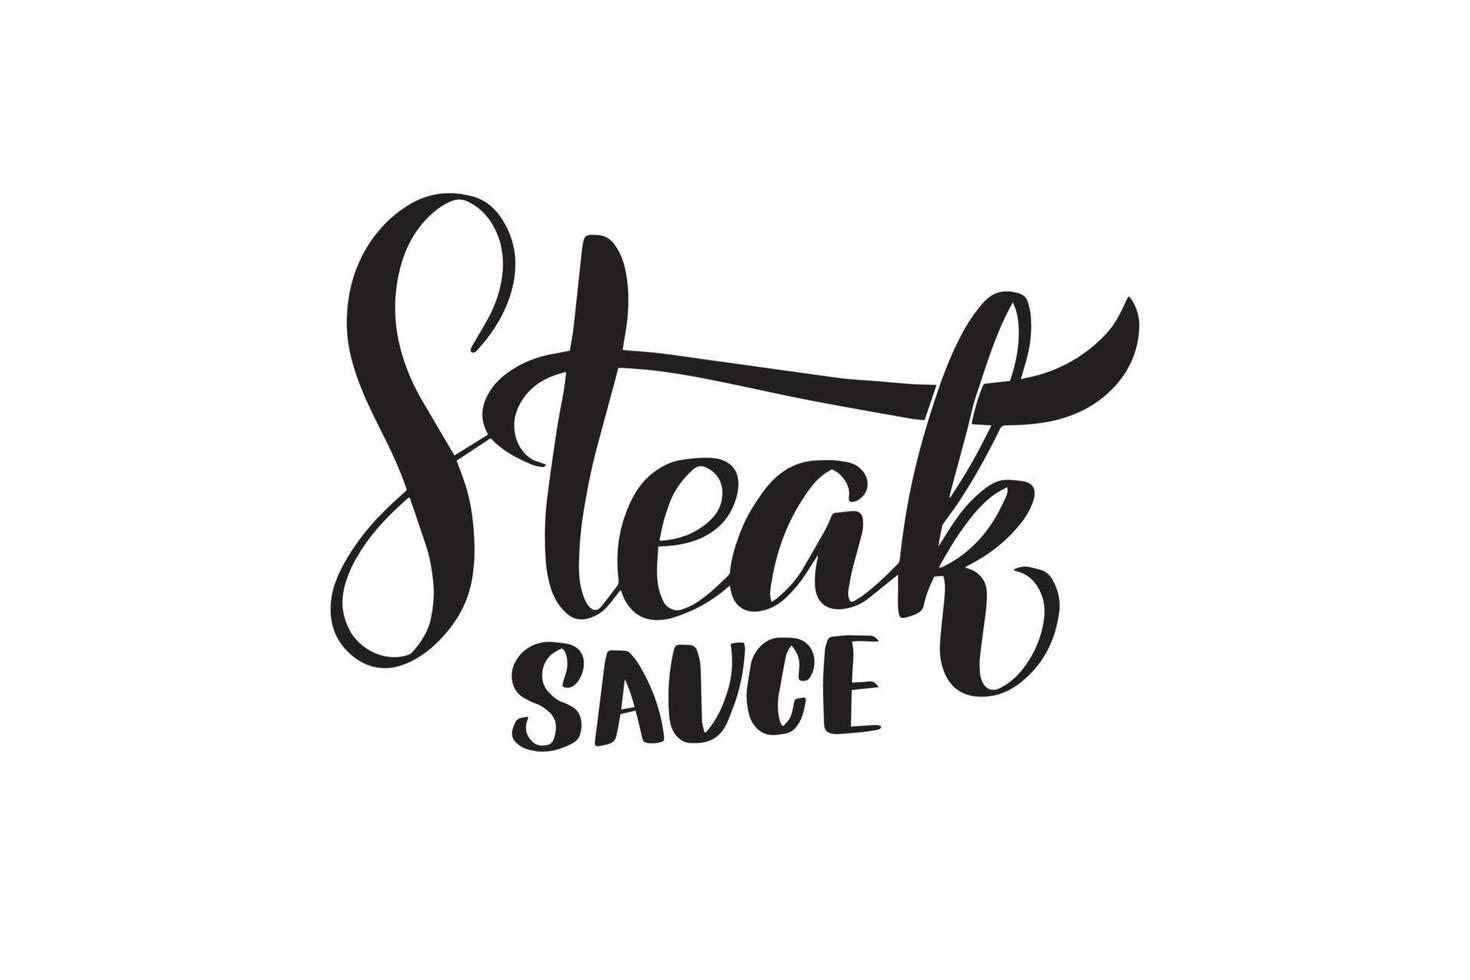 Inspirational handwritten brush lettering Steak sauce. Vector calligraphy illustration isolated on white background. Typography for banners, badges, postcard, tshirt, prints, posters.